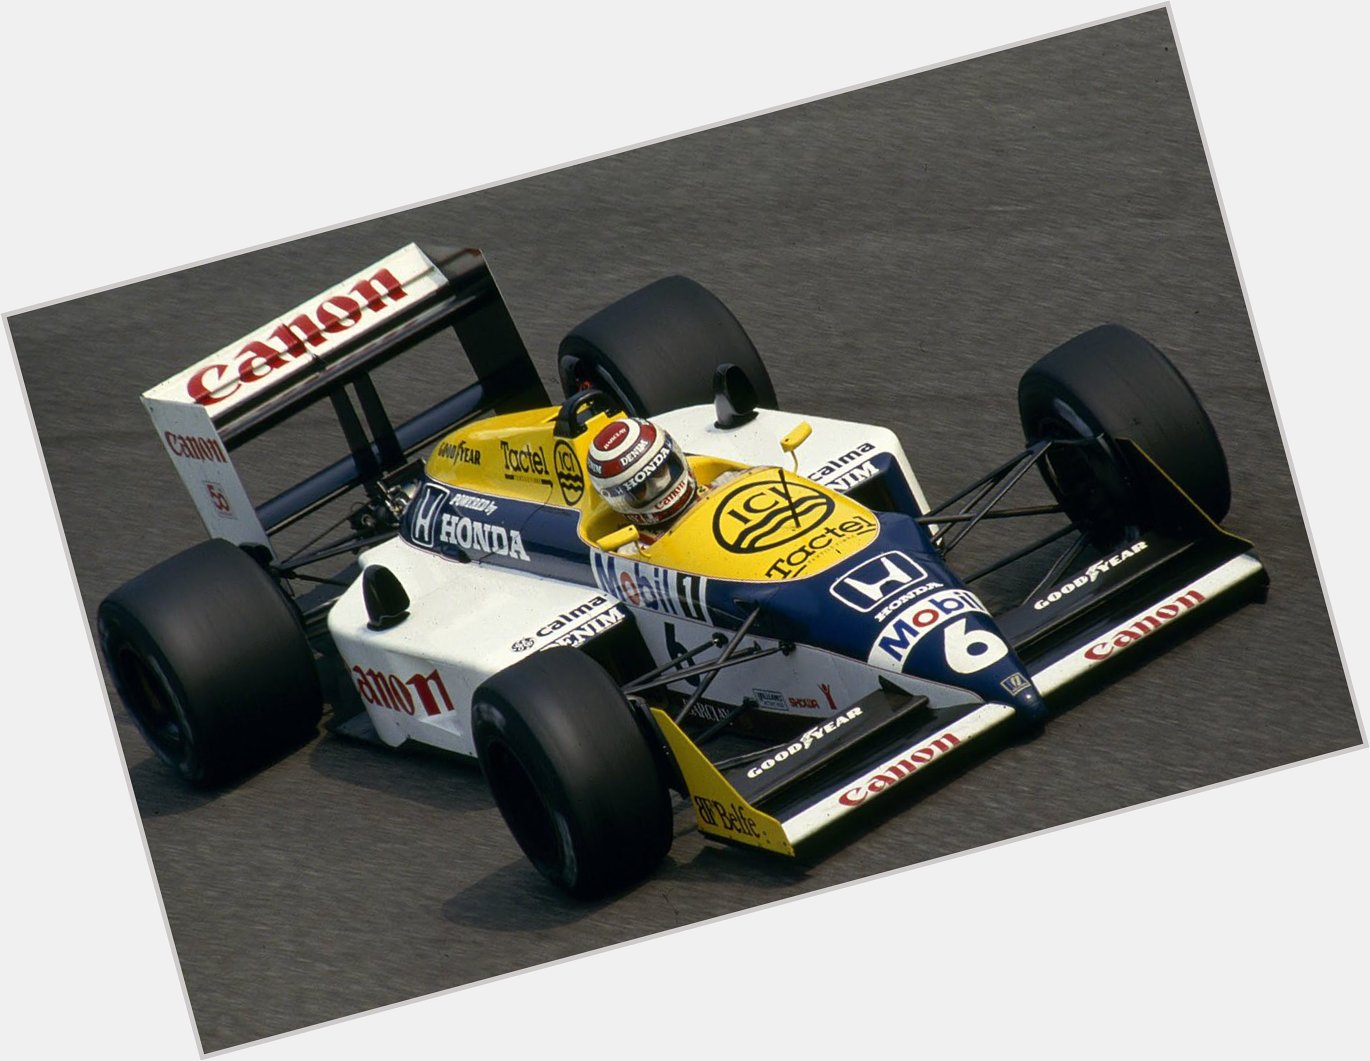 Wishing Nelson Piquet, first world champion in 1987, a very happy 65th birthday. 